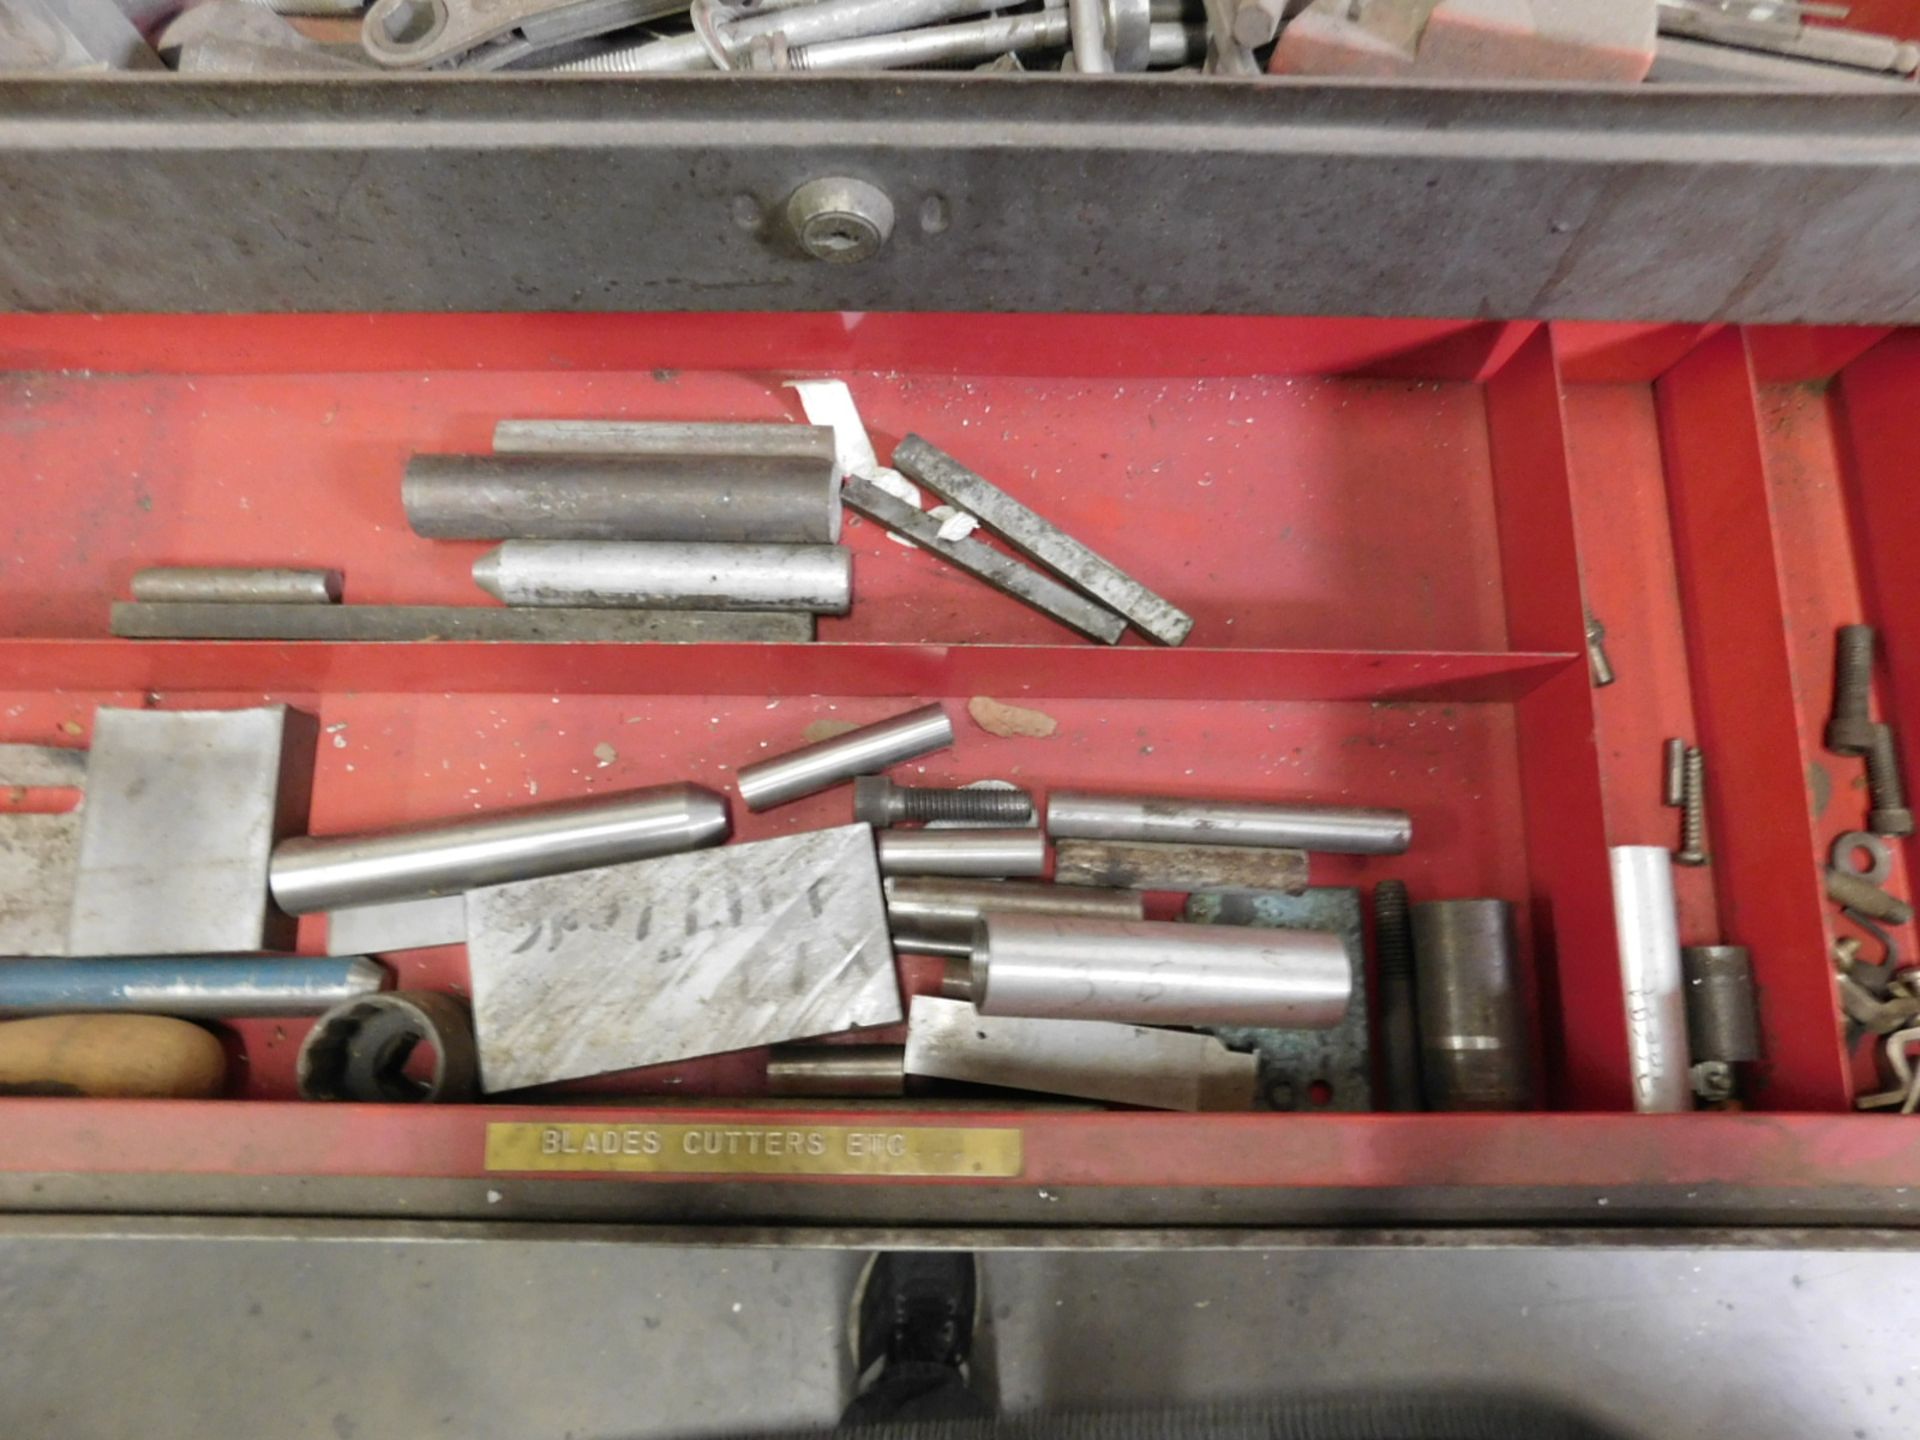 CRAFTSMAN 2-DRAWER TOOL BOX, W/ CONTENTS OF HAND TOOLS AND MISC SHOP ITEMS - Image 3 of 4